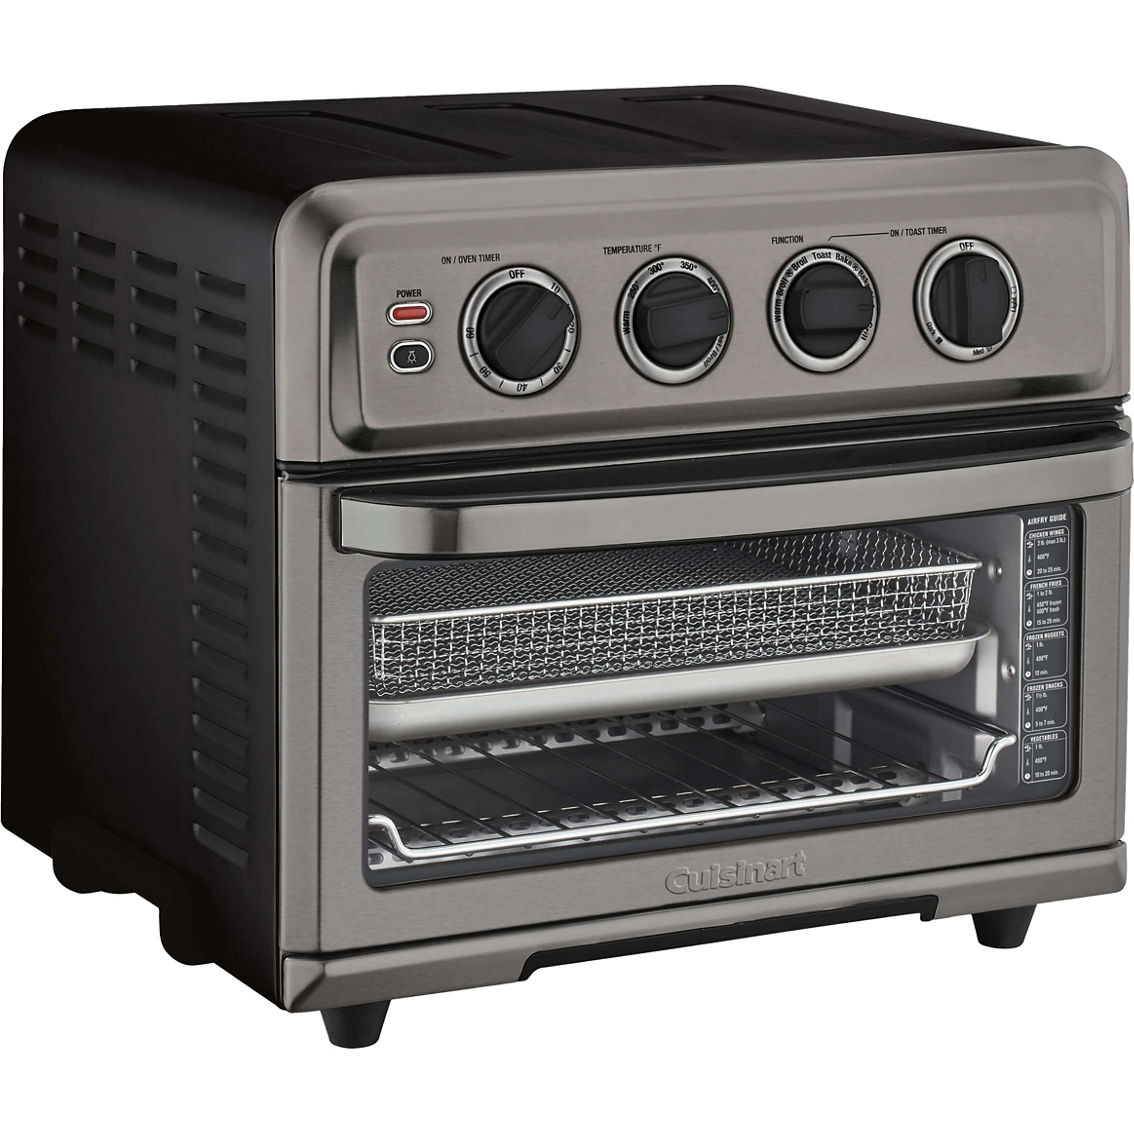 Cuisinart Air Fryer Toaster Oven with Grill - Image 3 of 3